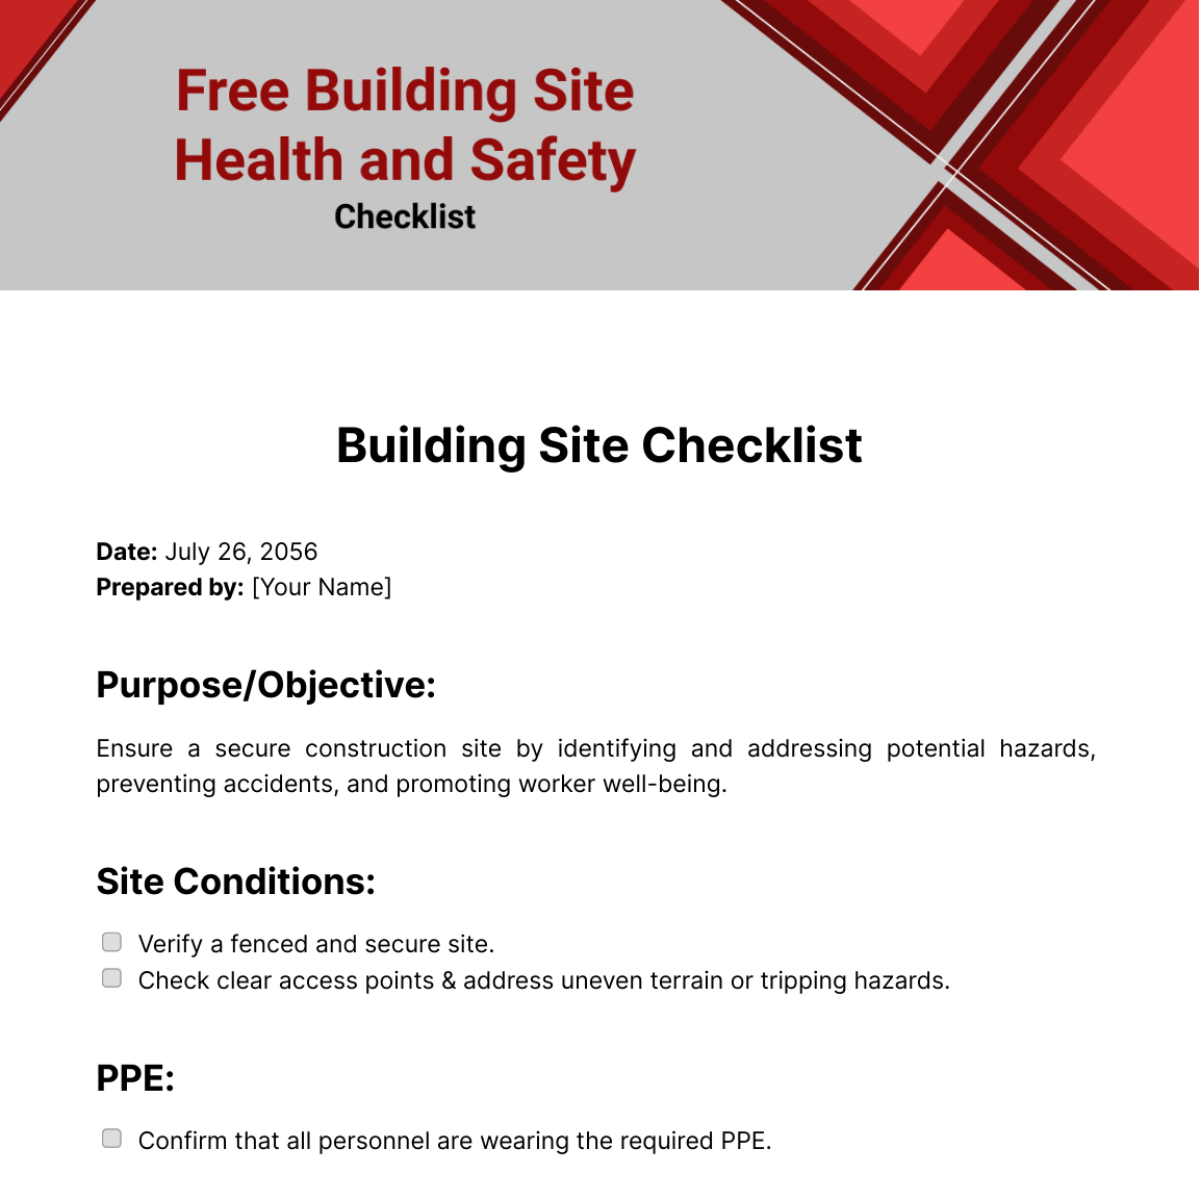 Free Building Site Health and Safety Checklist Template